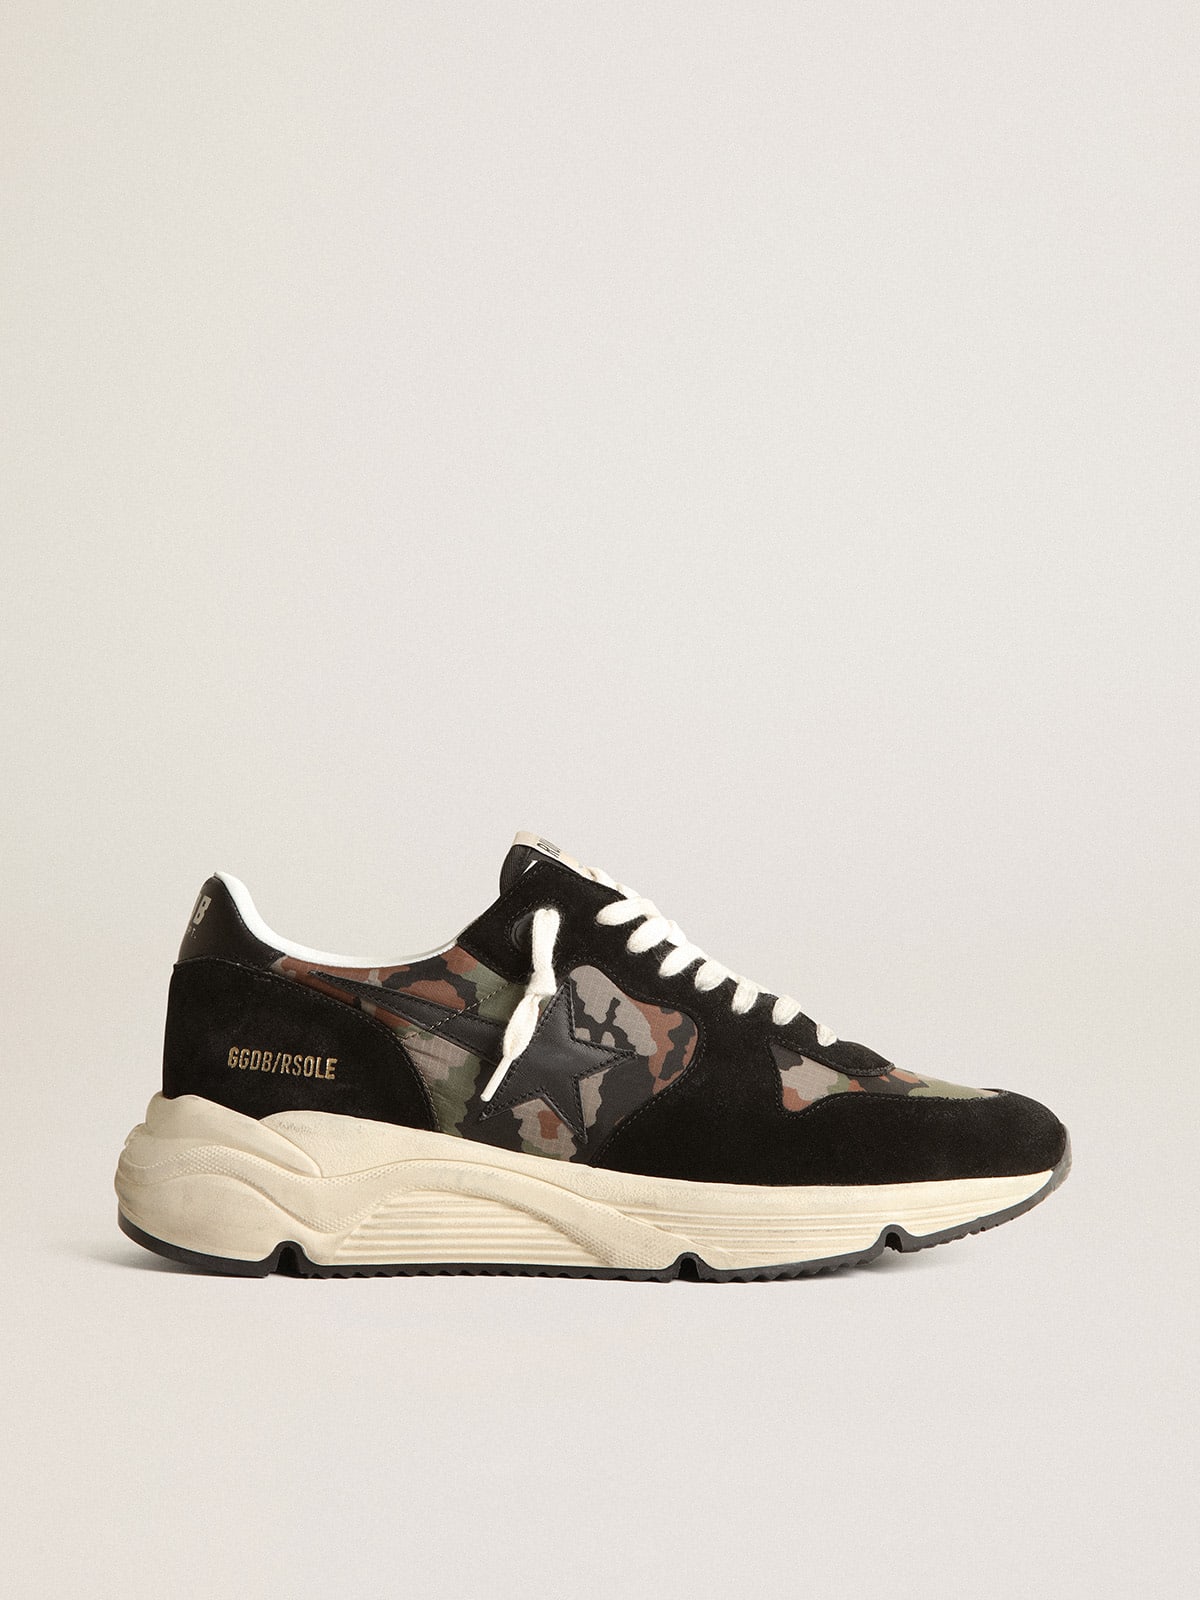 Running Sole sneakers in camouflage-print ripstop nylon with black leather star